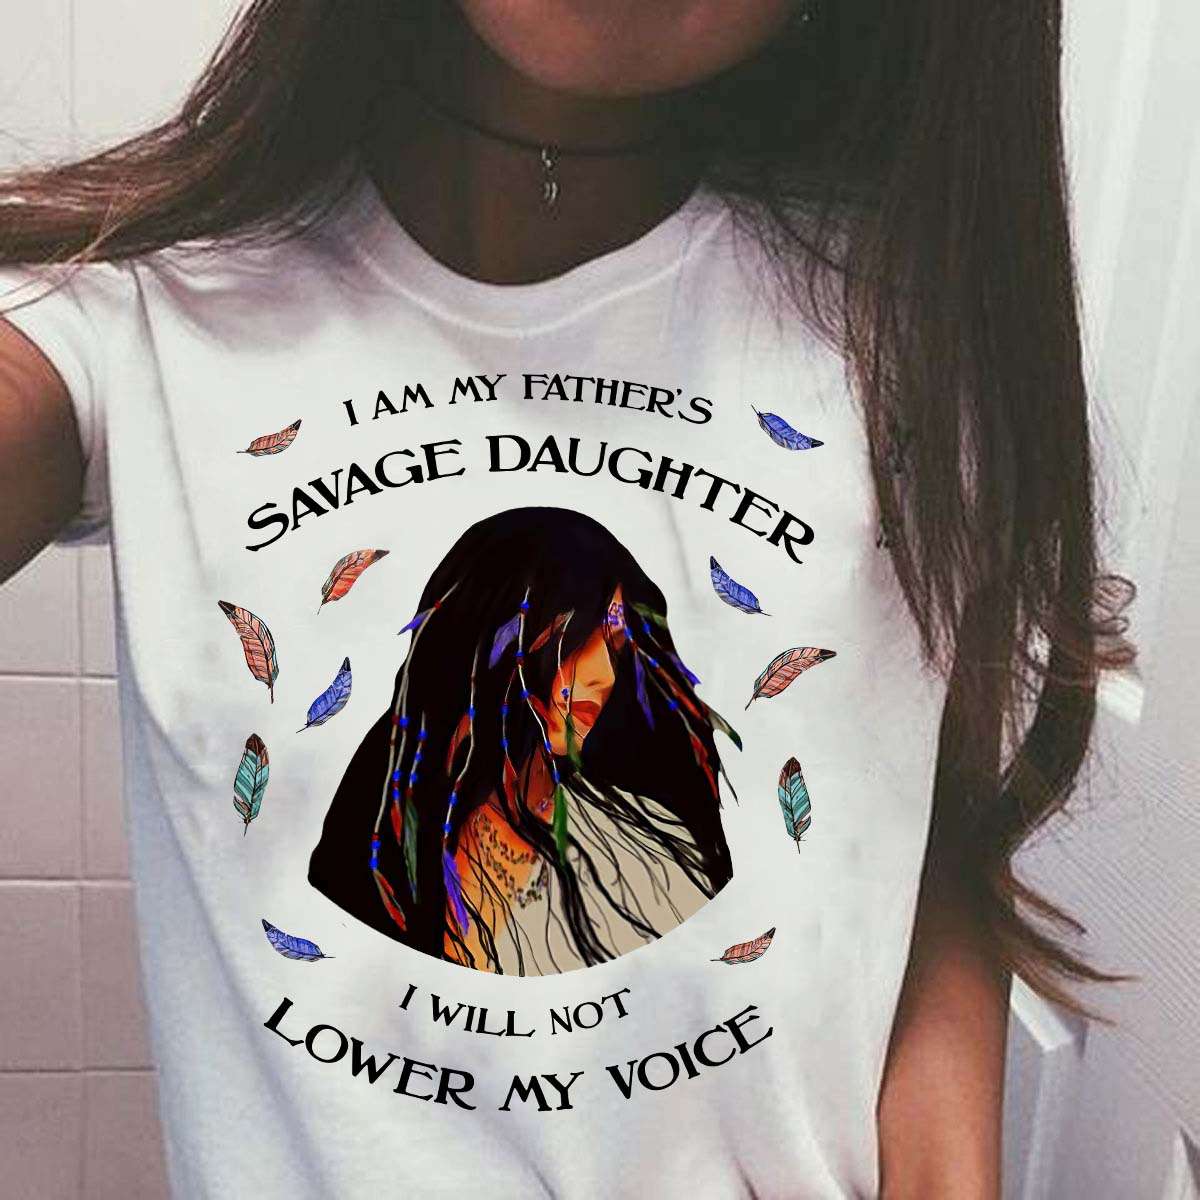 Native Beautiful Girl - I am my father's savage daughter i will not lower my voice